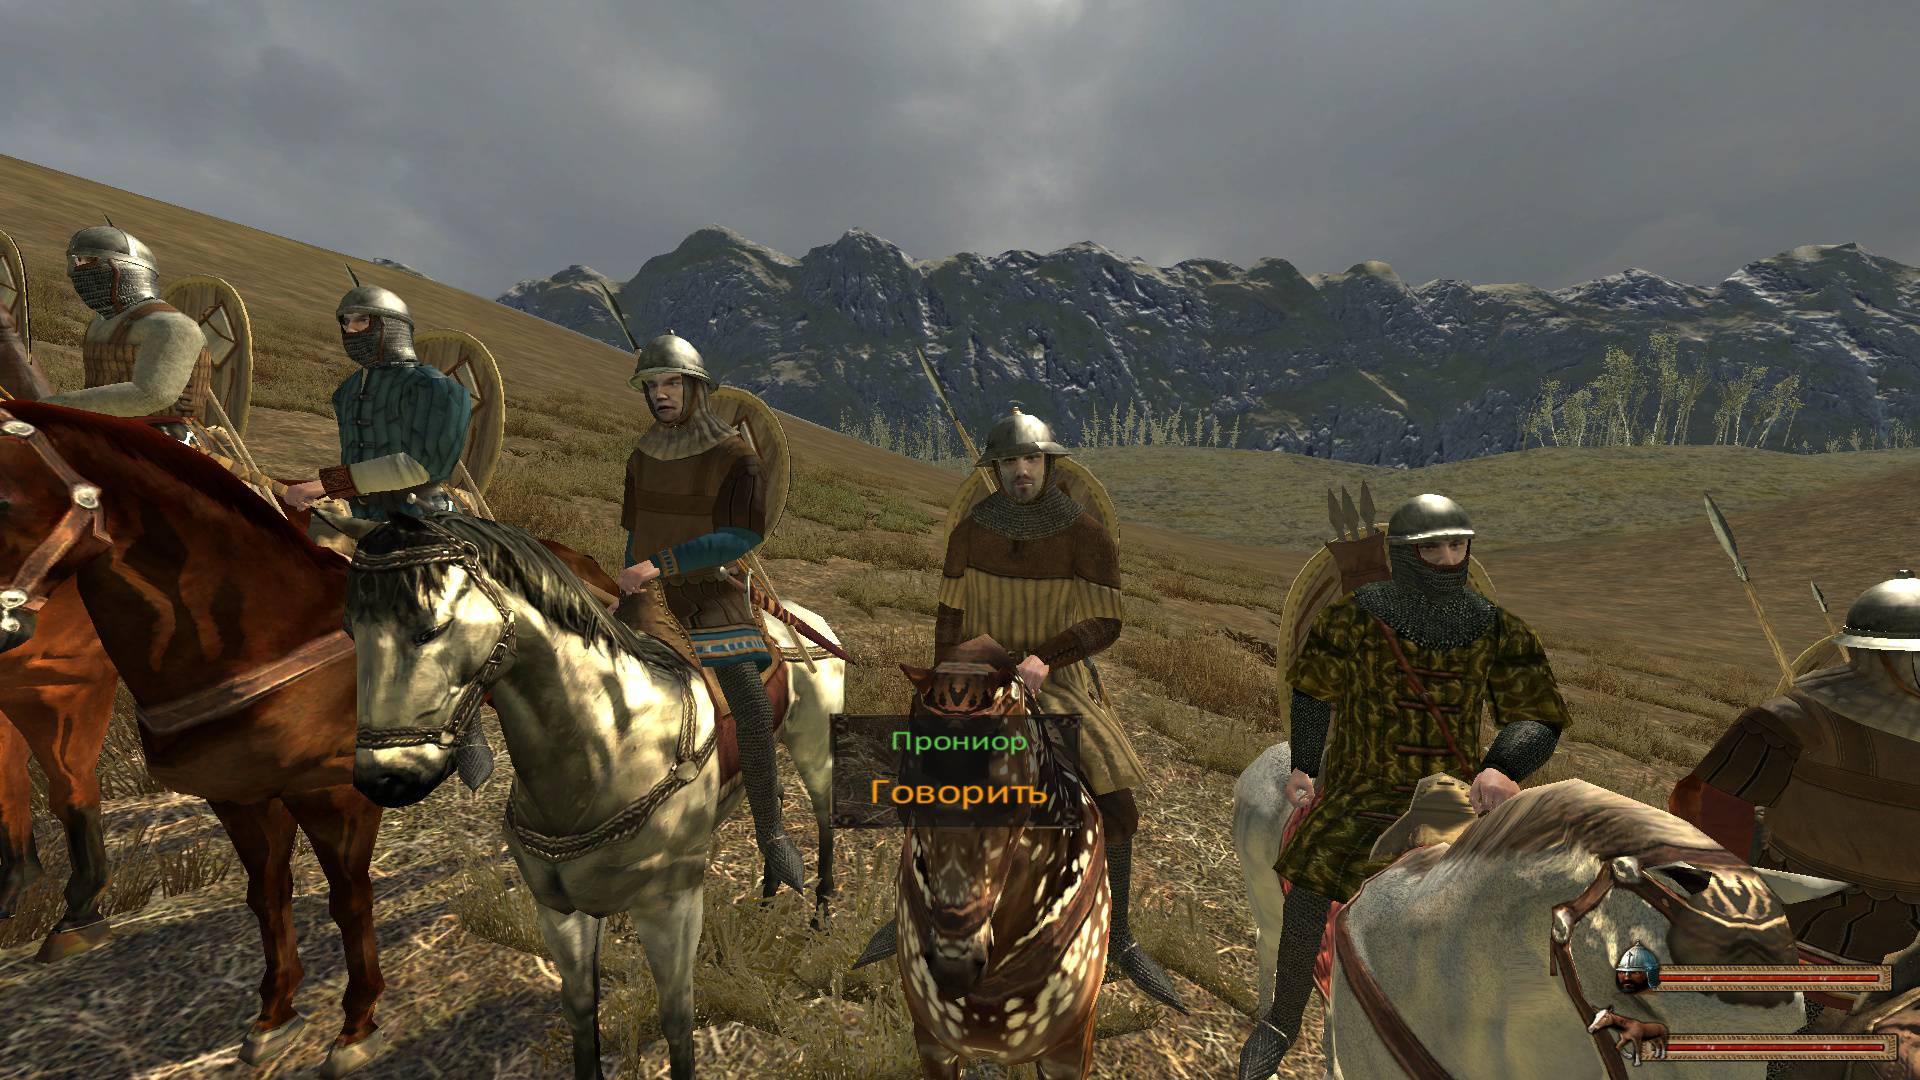 Steam warband. Warband Medieval Conquest. Medieval Conquest Mount Blade Warband. Мод для варбанд Medieval Conquest. Medieval Conquest русификатор.